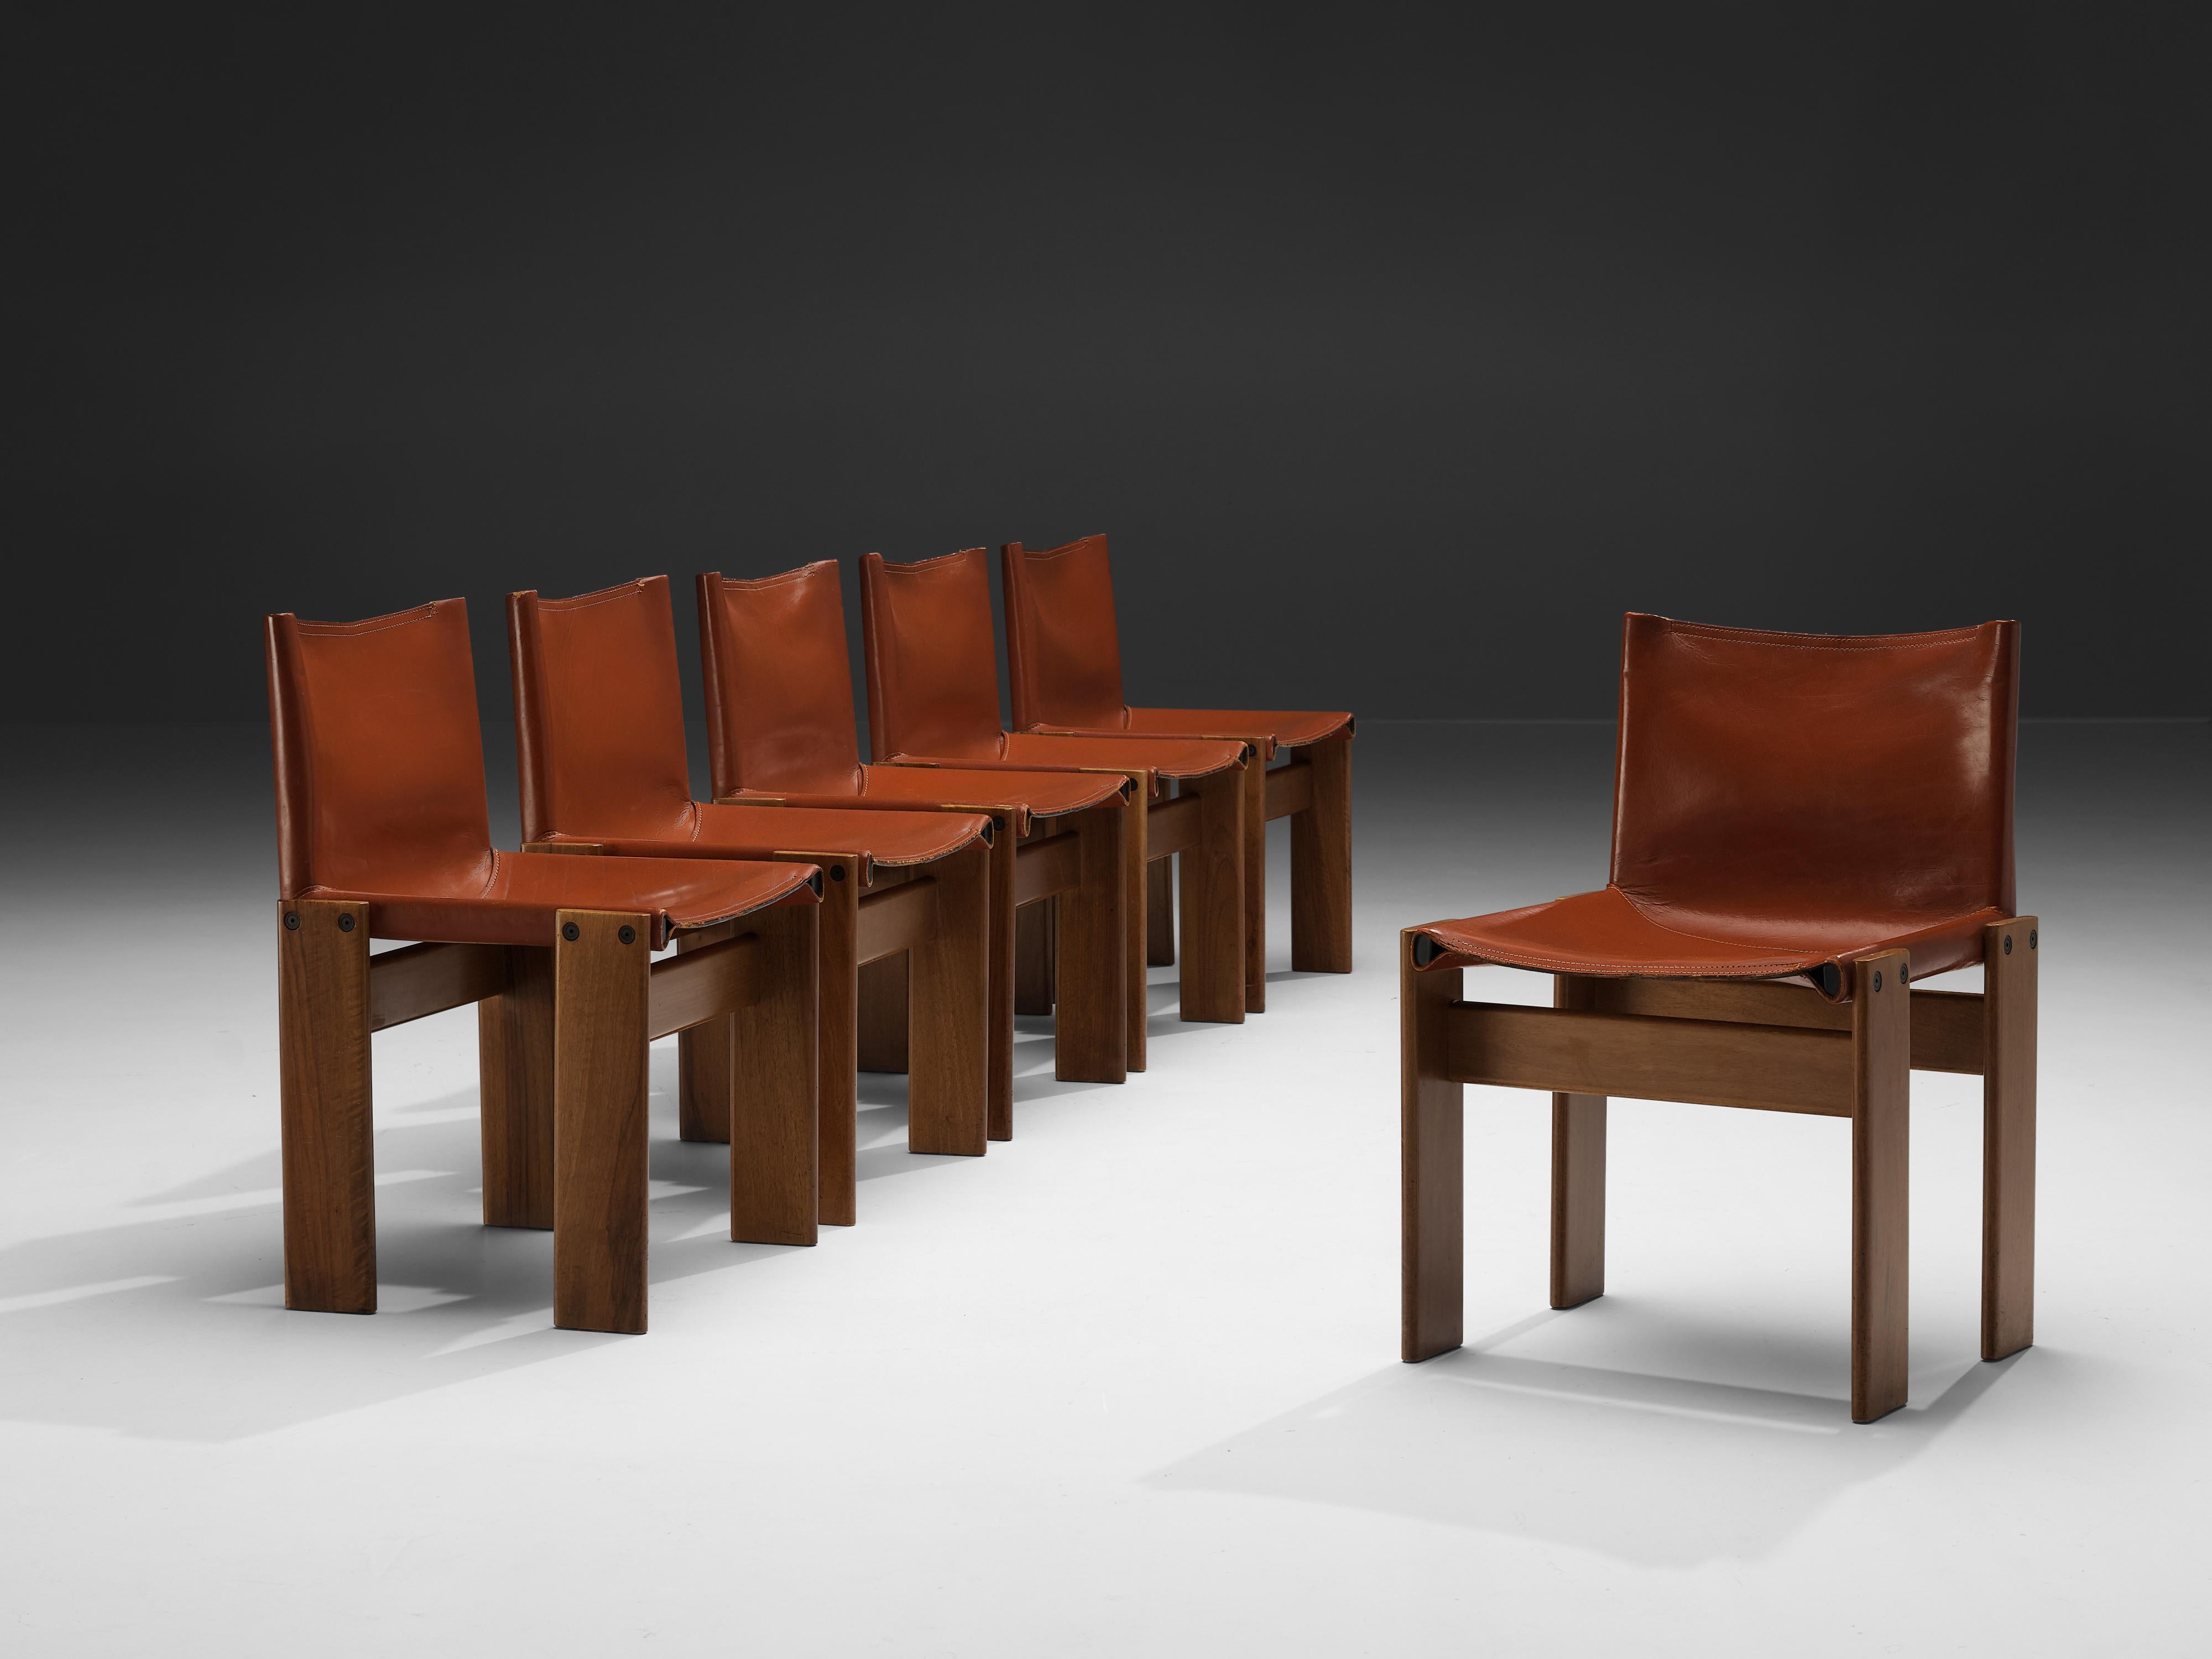 Afra & Tobia Scarpa for Molteni, set of six 'Monk' dining chairs, walnut, red leather, Italy, 1974

Afra & Tobia Scarpa designed the 'Monk' chairs for Molteni in 1974. The red leather forms a striking combination with the beautifully grained